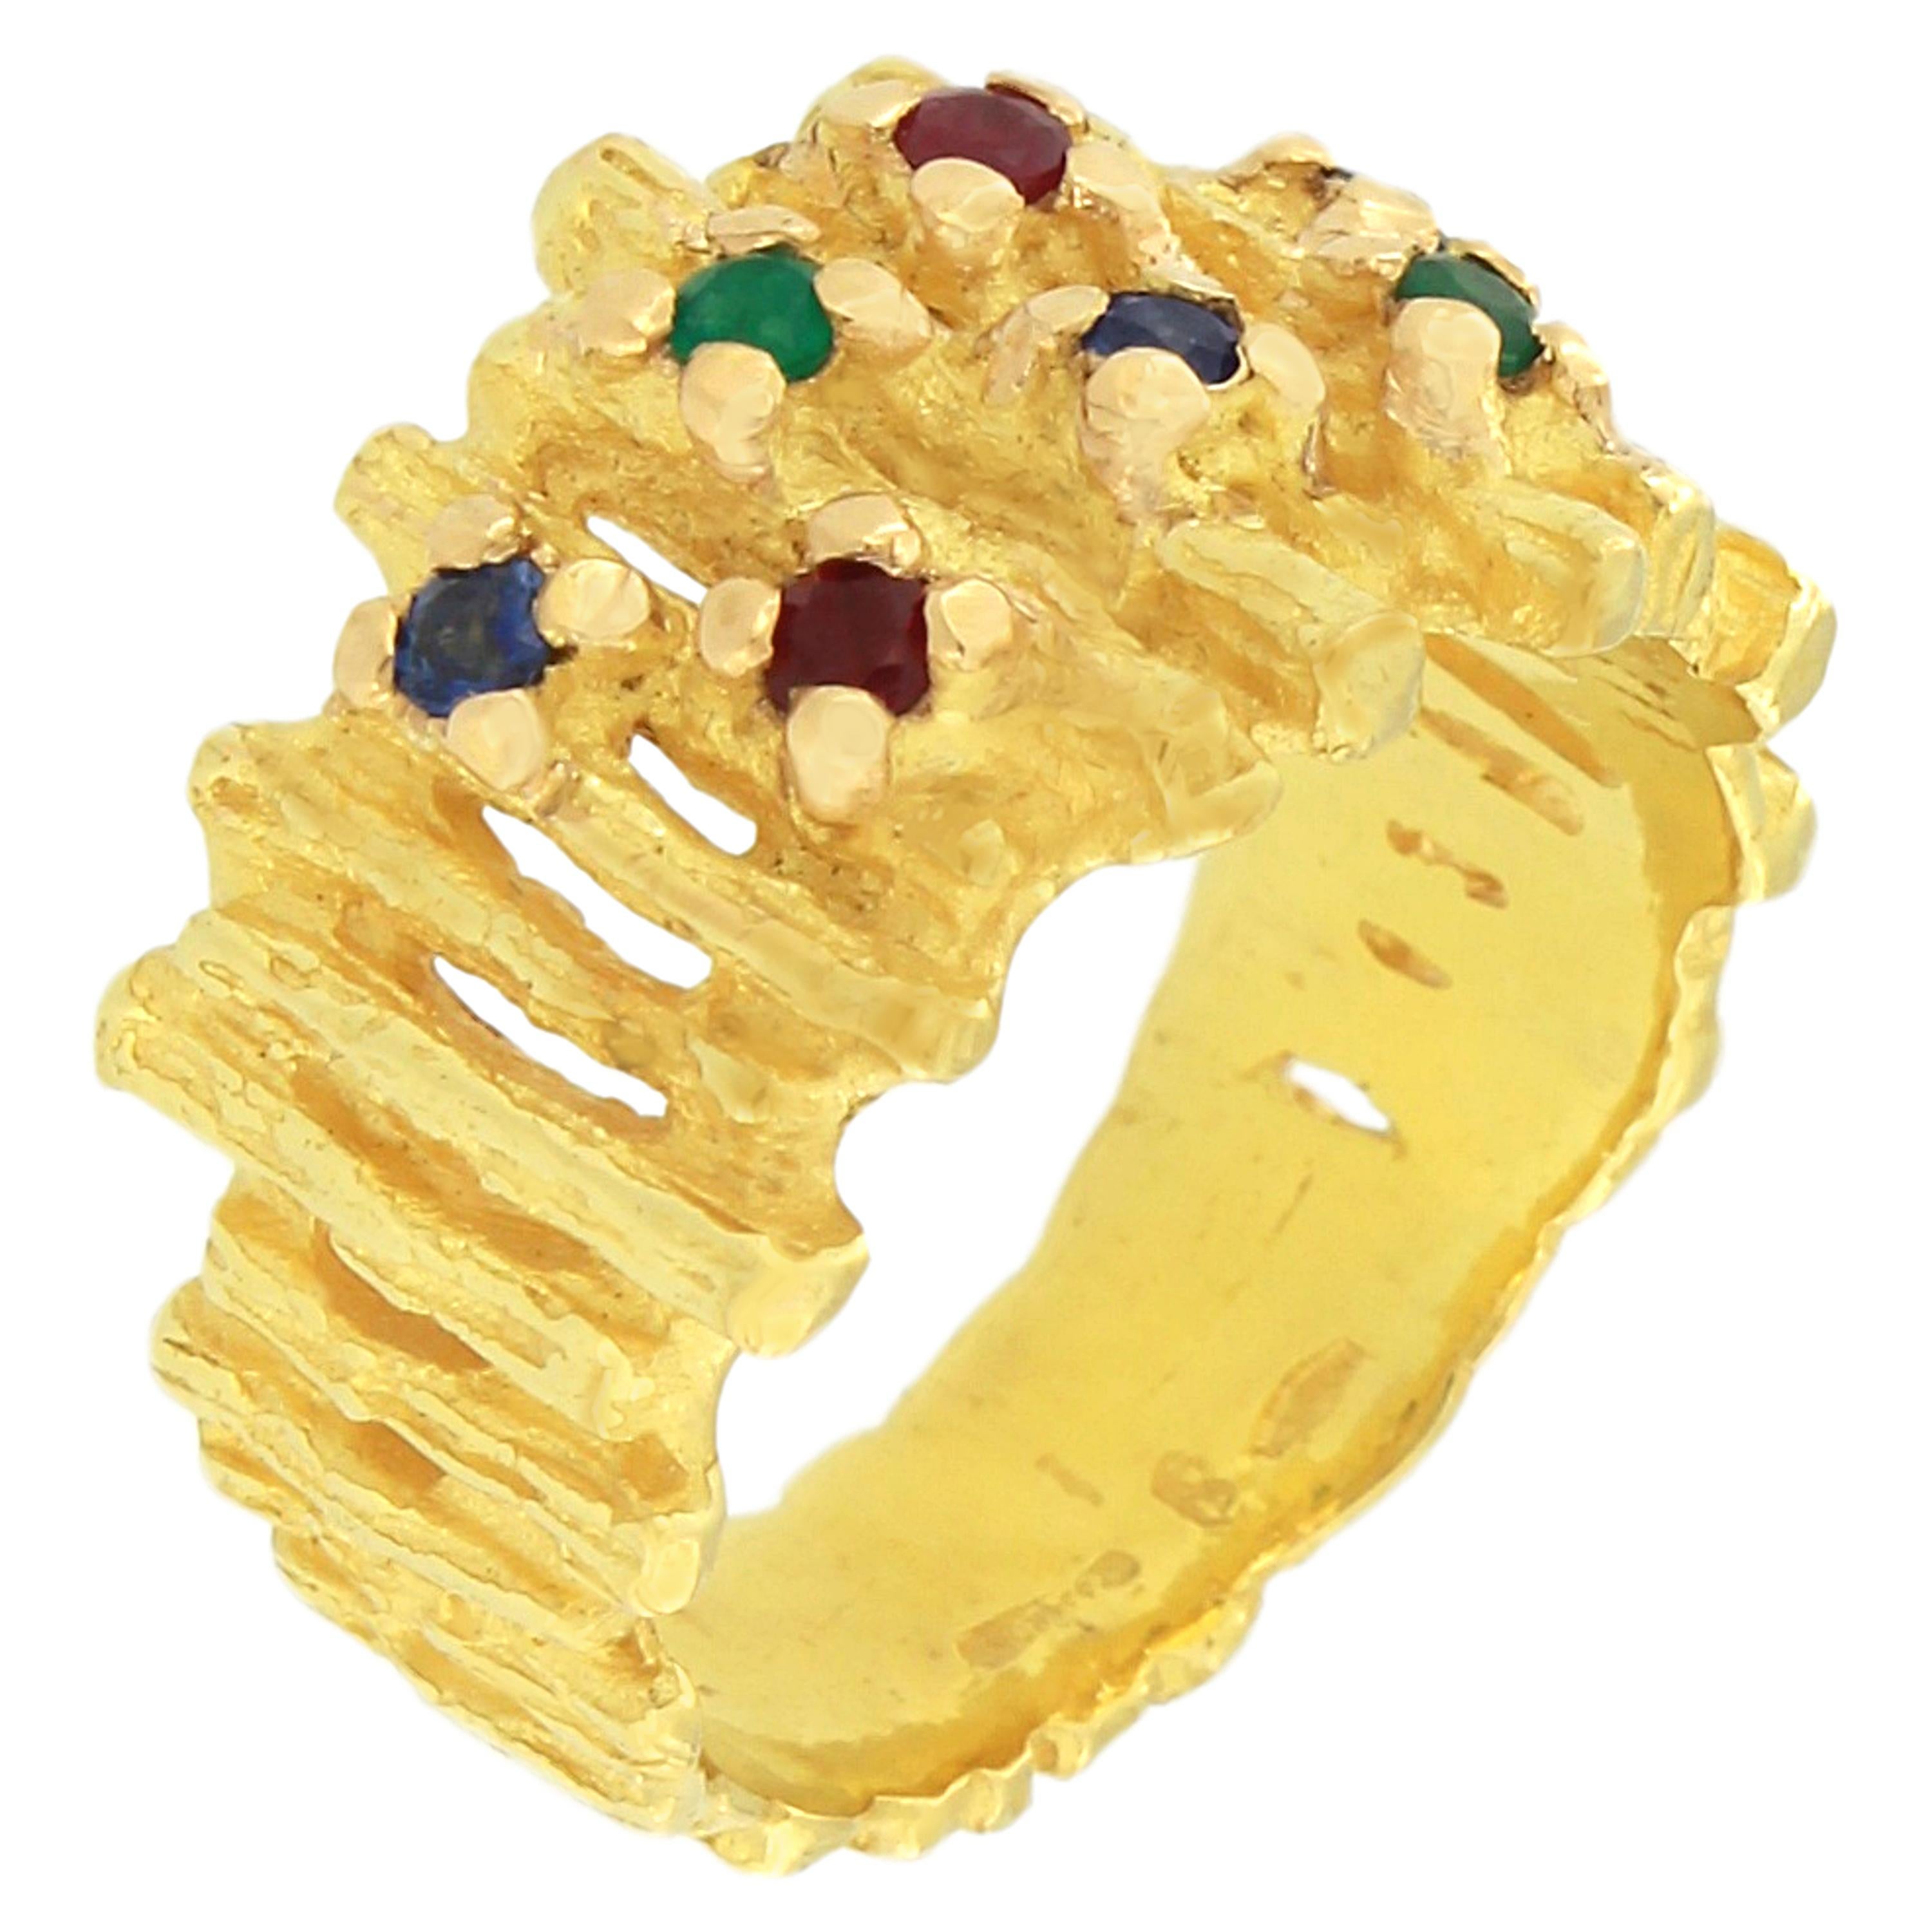 Gorgeous Ruby Emerald and Blu Sapphire gemstone Satin Yellow Gold Cocktail Ring, from Sacchi’s Abstract Collection, hand-crafted with lost-wax casting technique.

Lost-wax casting, one of the oldest techniques for creating jewelry, forms the basis